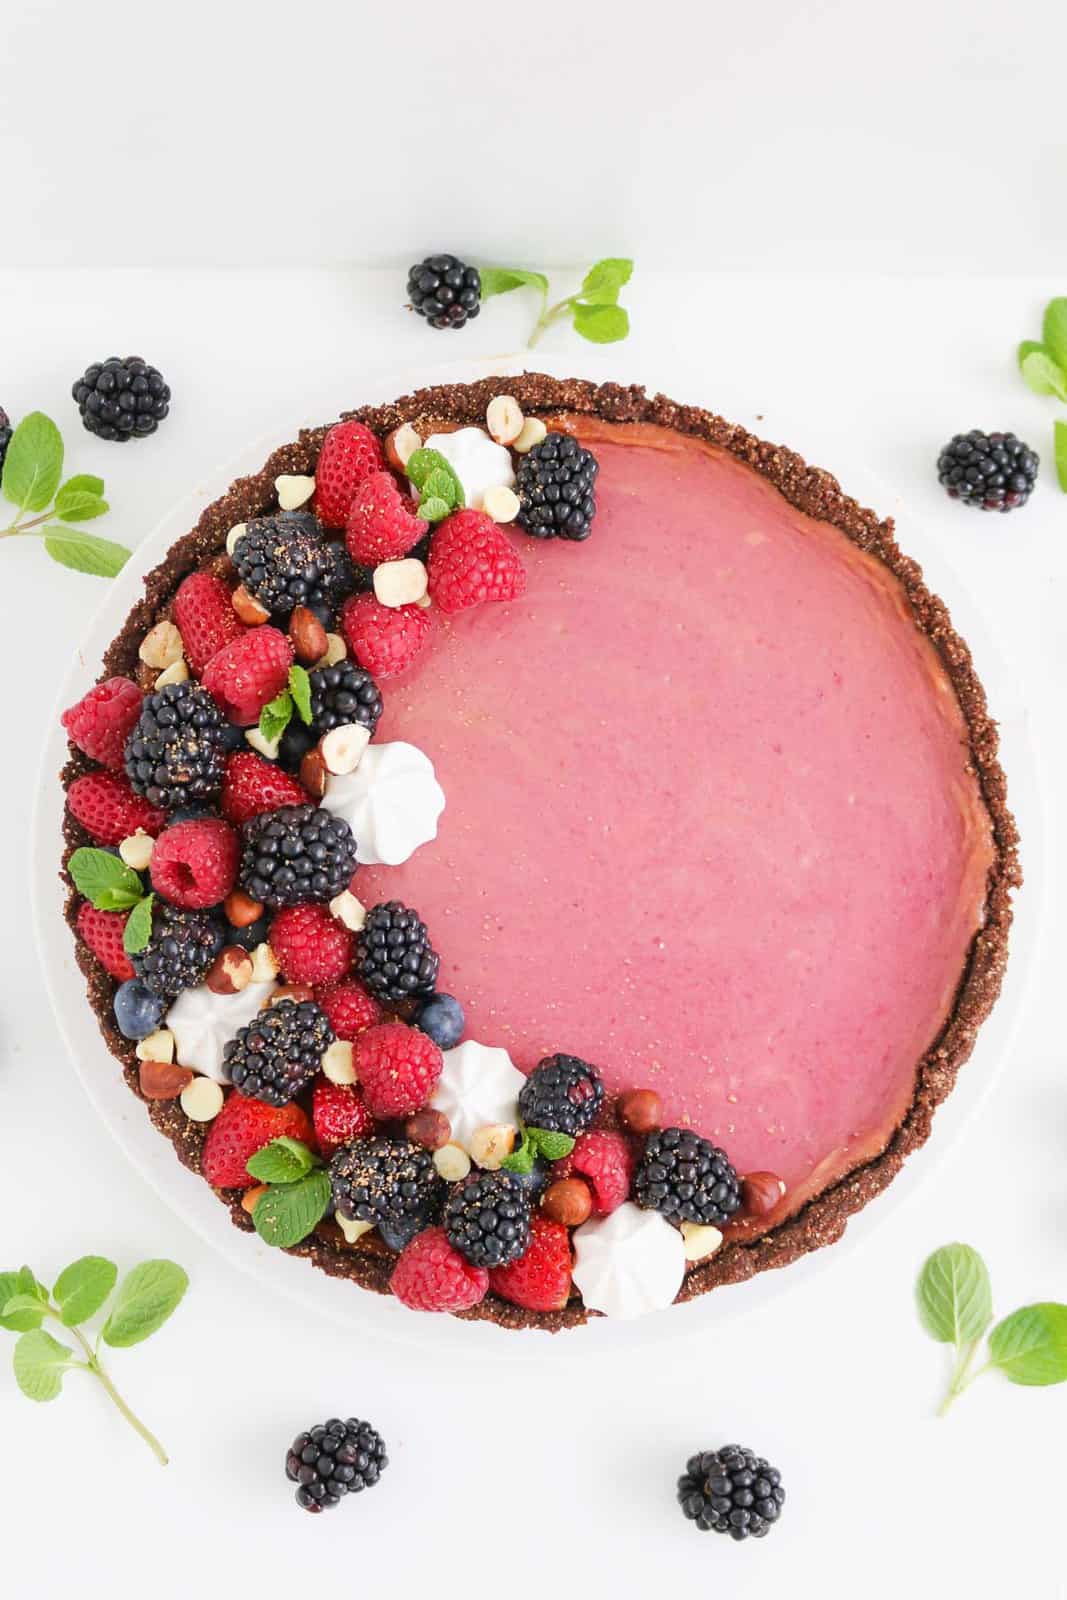 A pink cheesecake covered with berries, mint leaves and meringues with a chocolate crust.